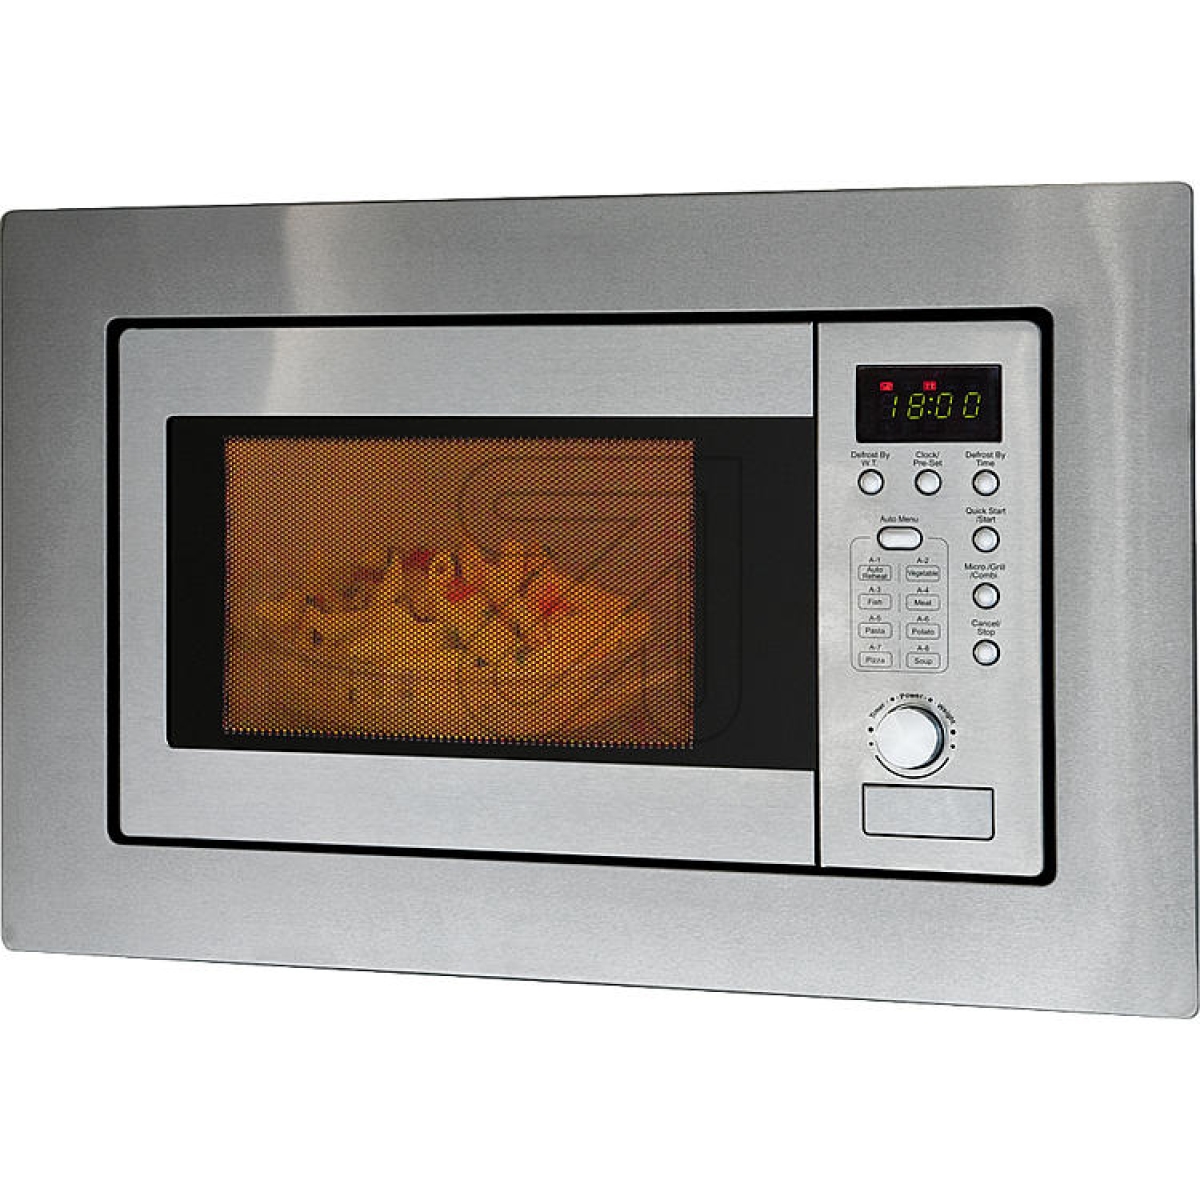 BomannBuilt-in microwave MWG 2215 EBArticle-No: 431245